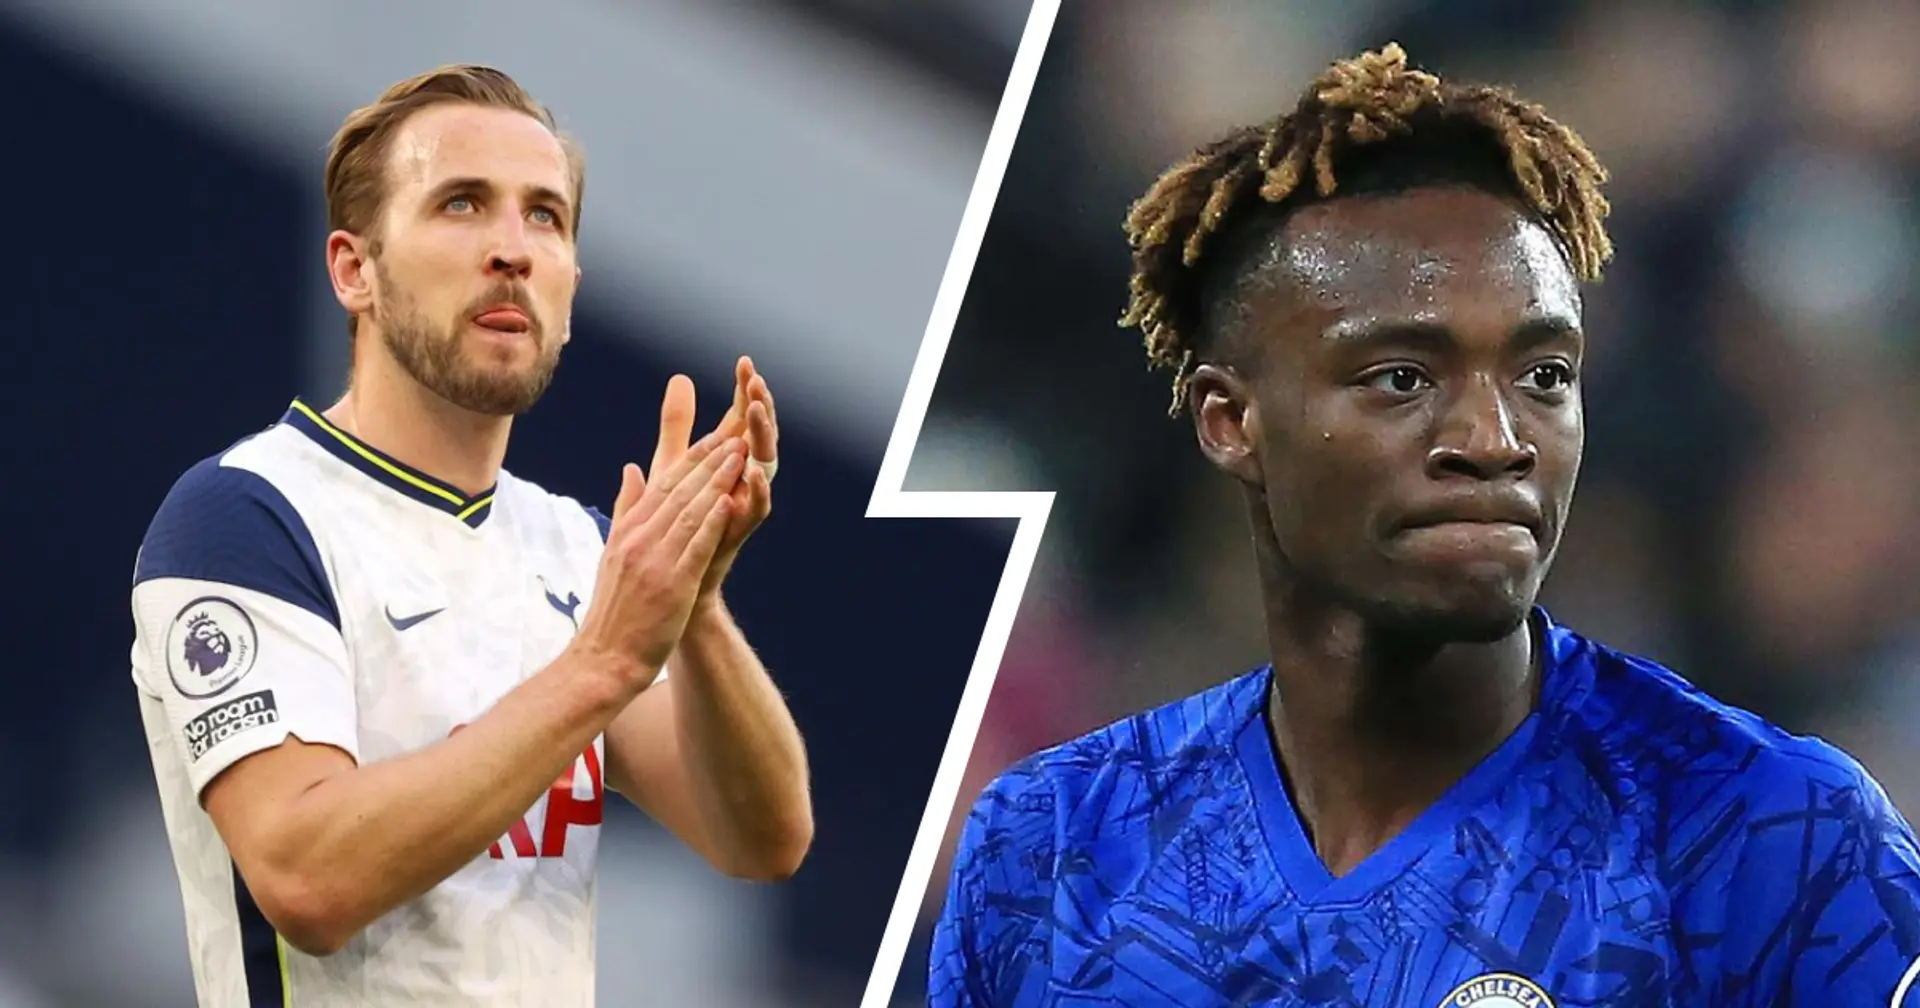 Kane update, Abraham close to leaving: latest Chelsea transfer round-up with probability ratings